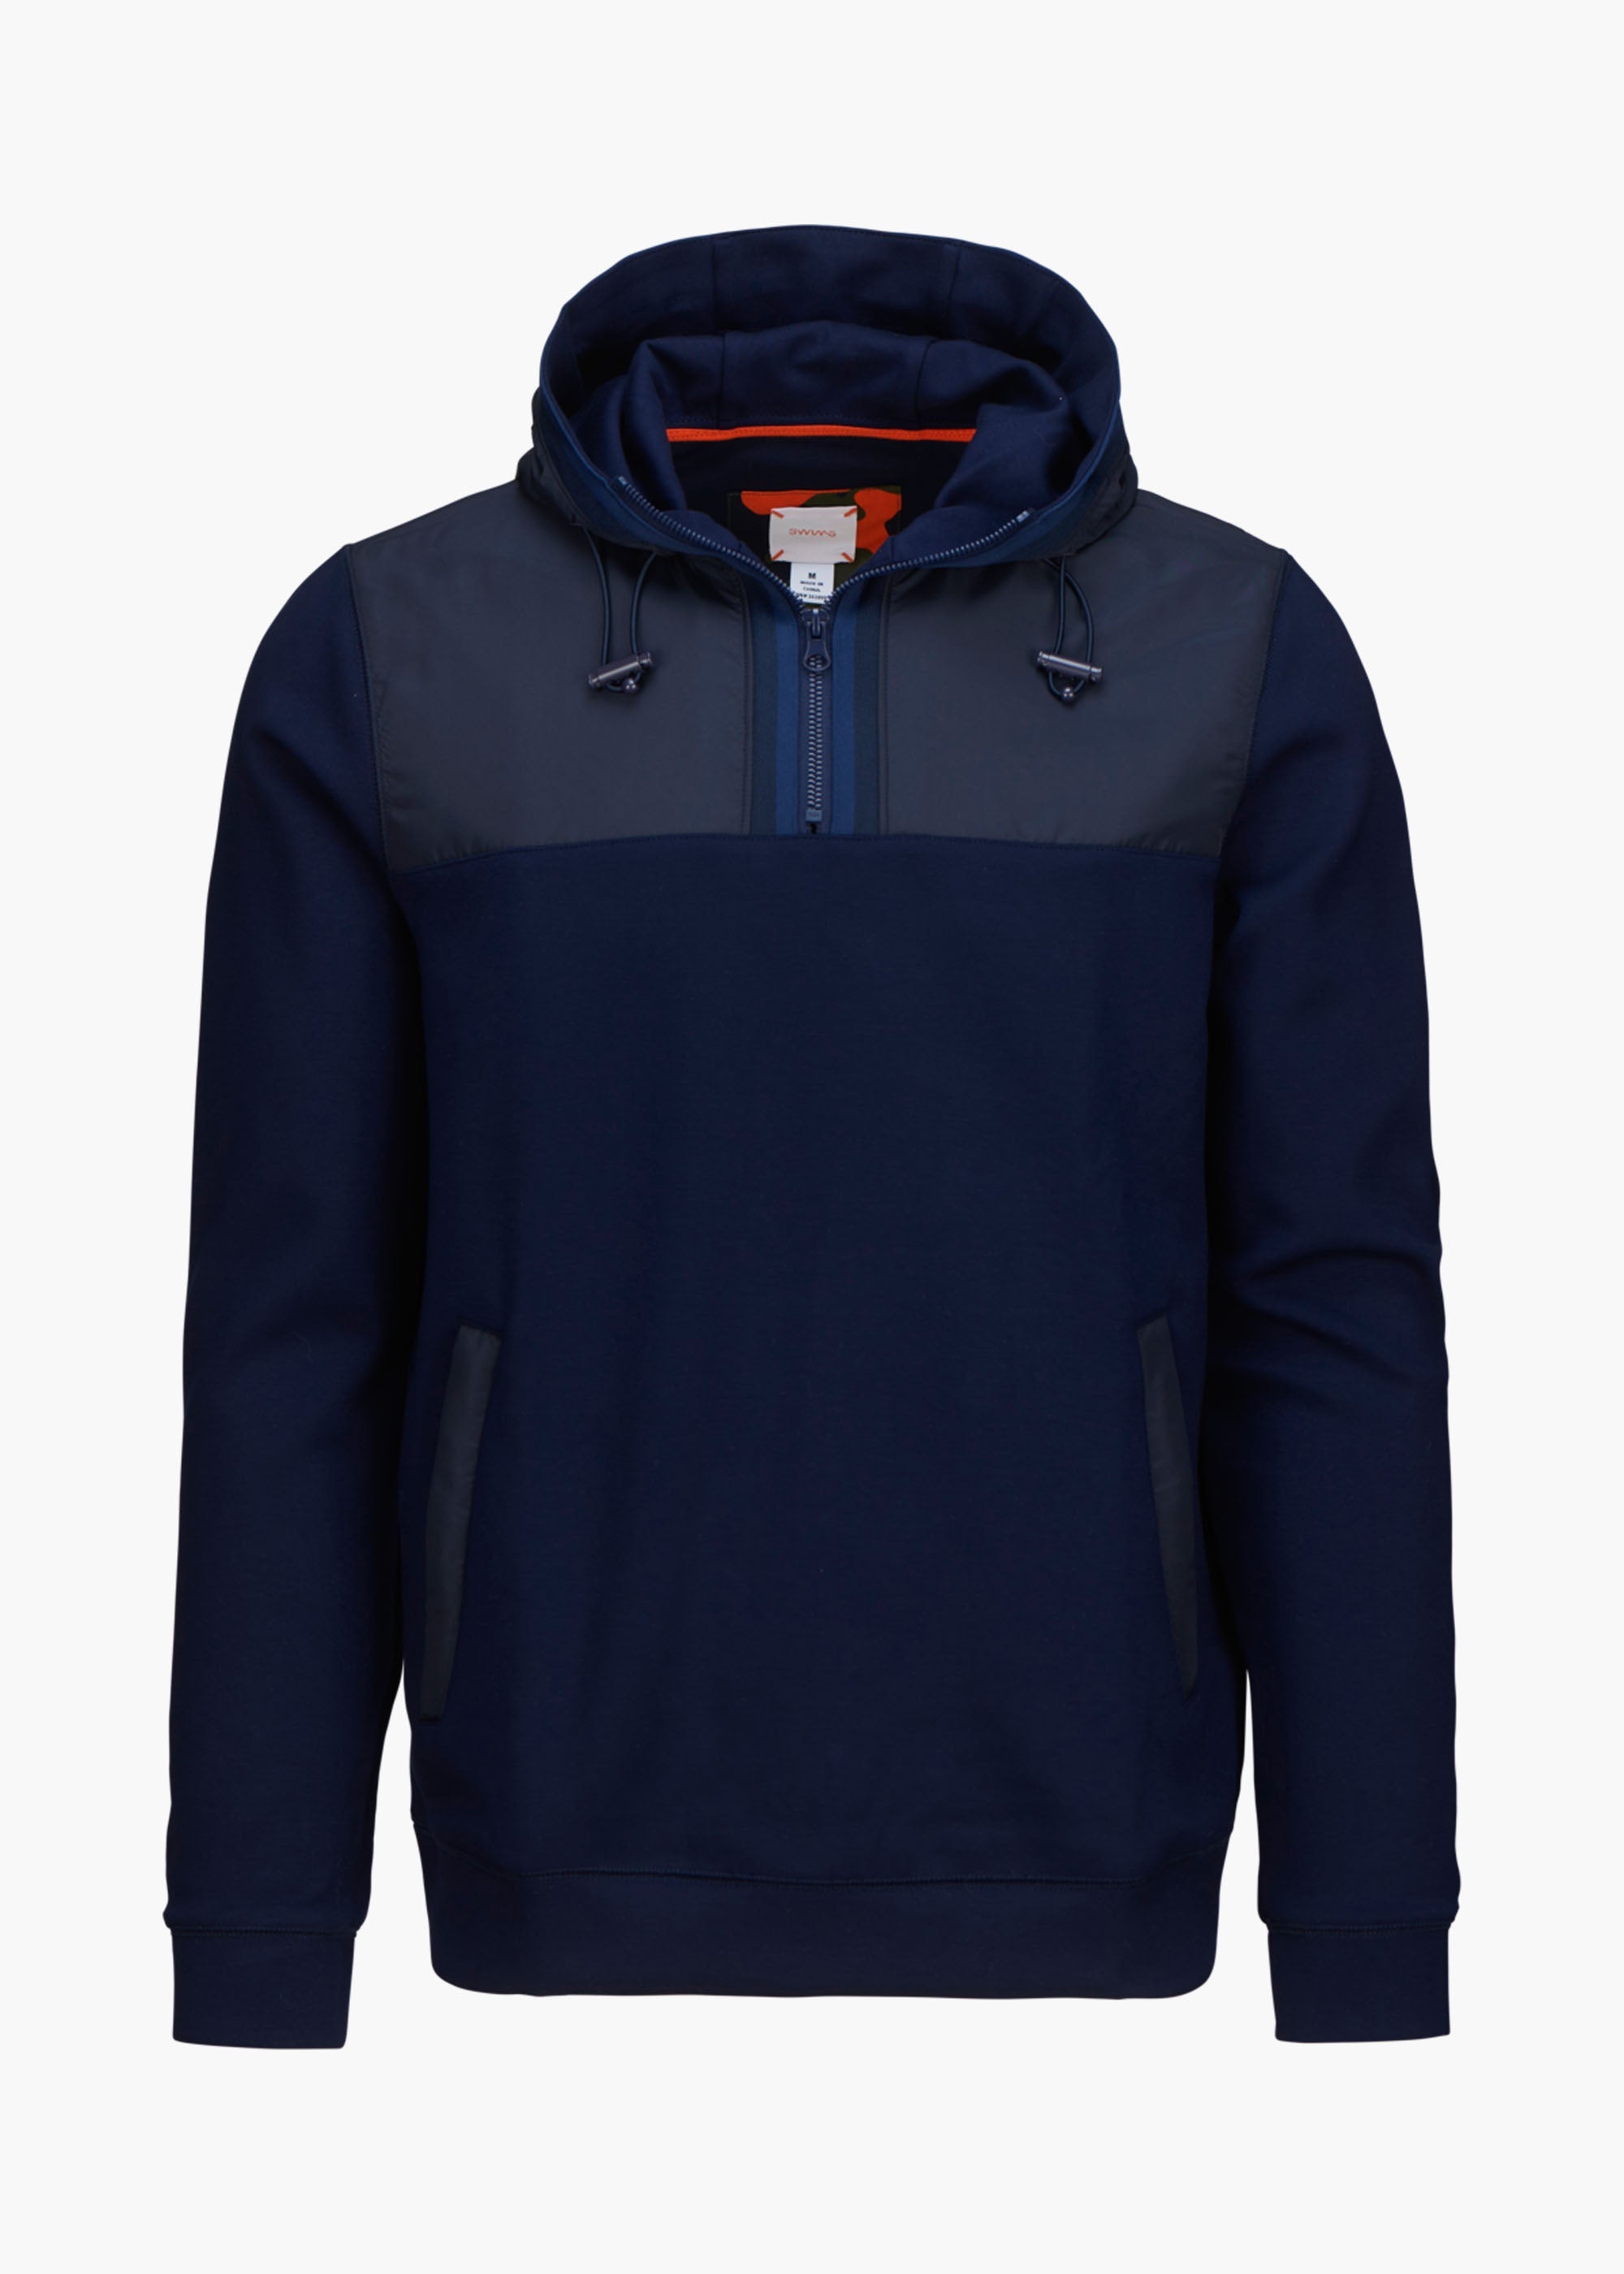 Davos Hoodie in Navy for Mens, SWIMS